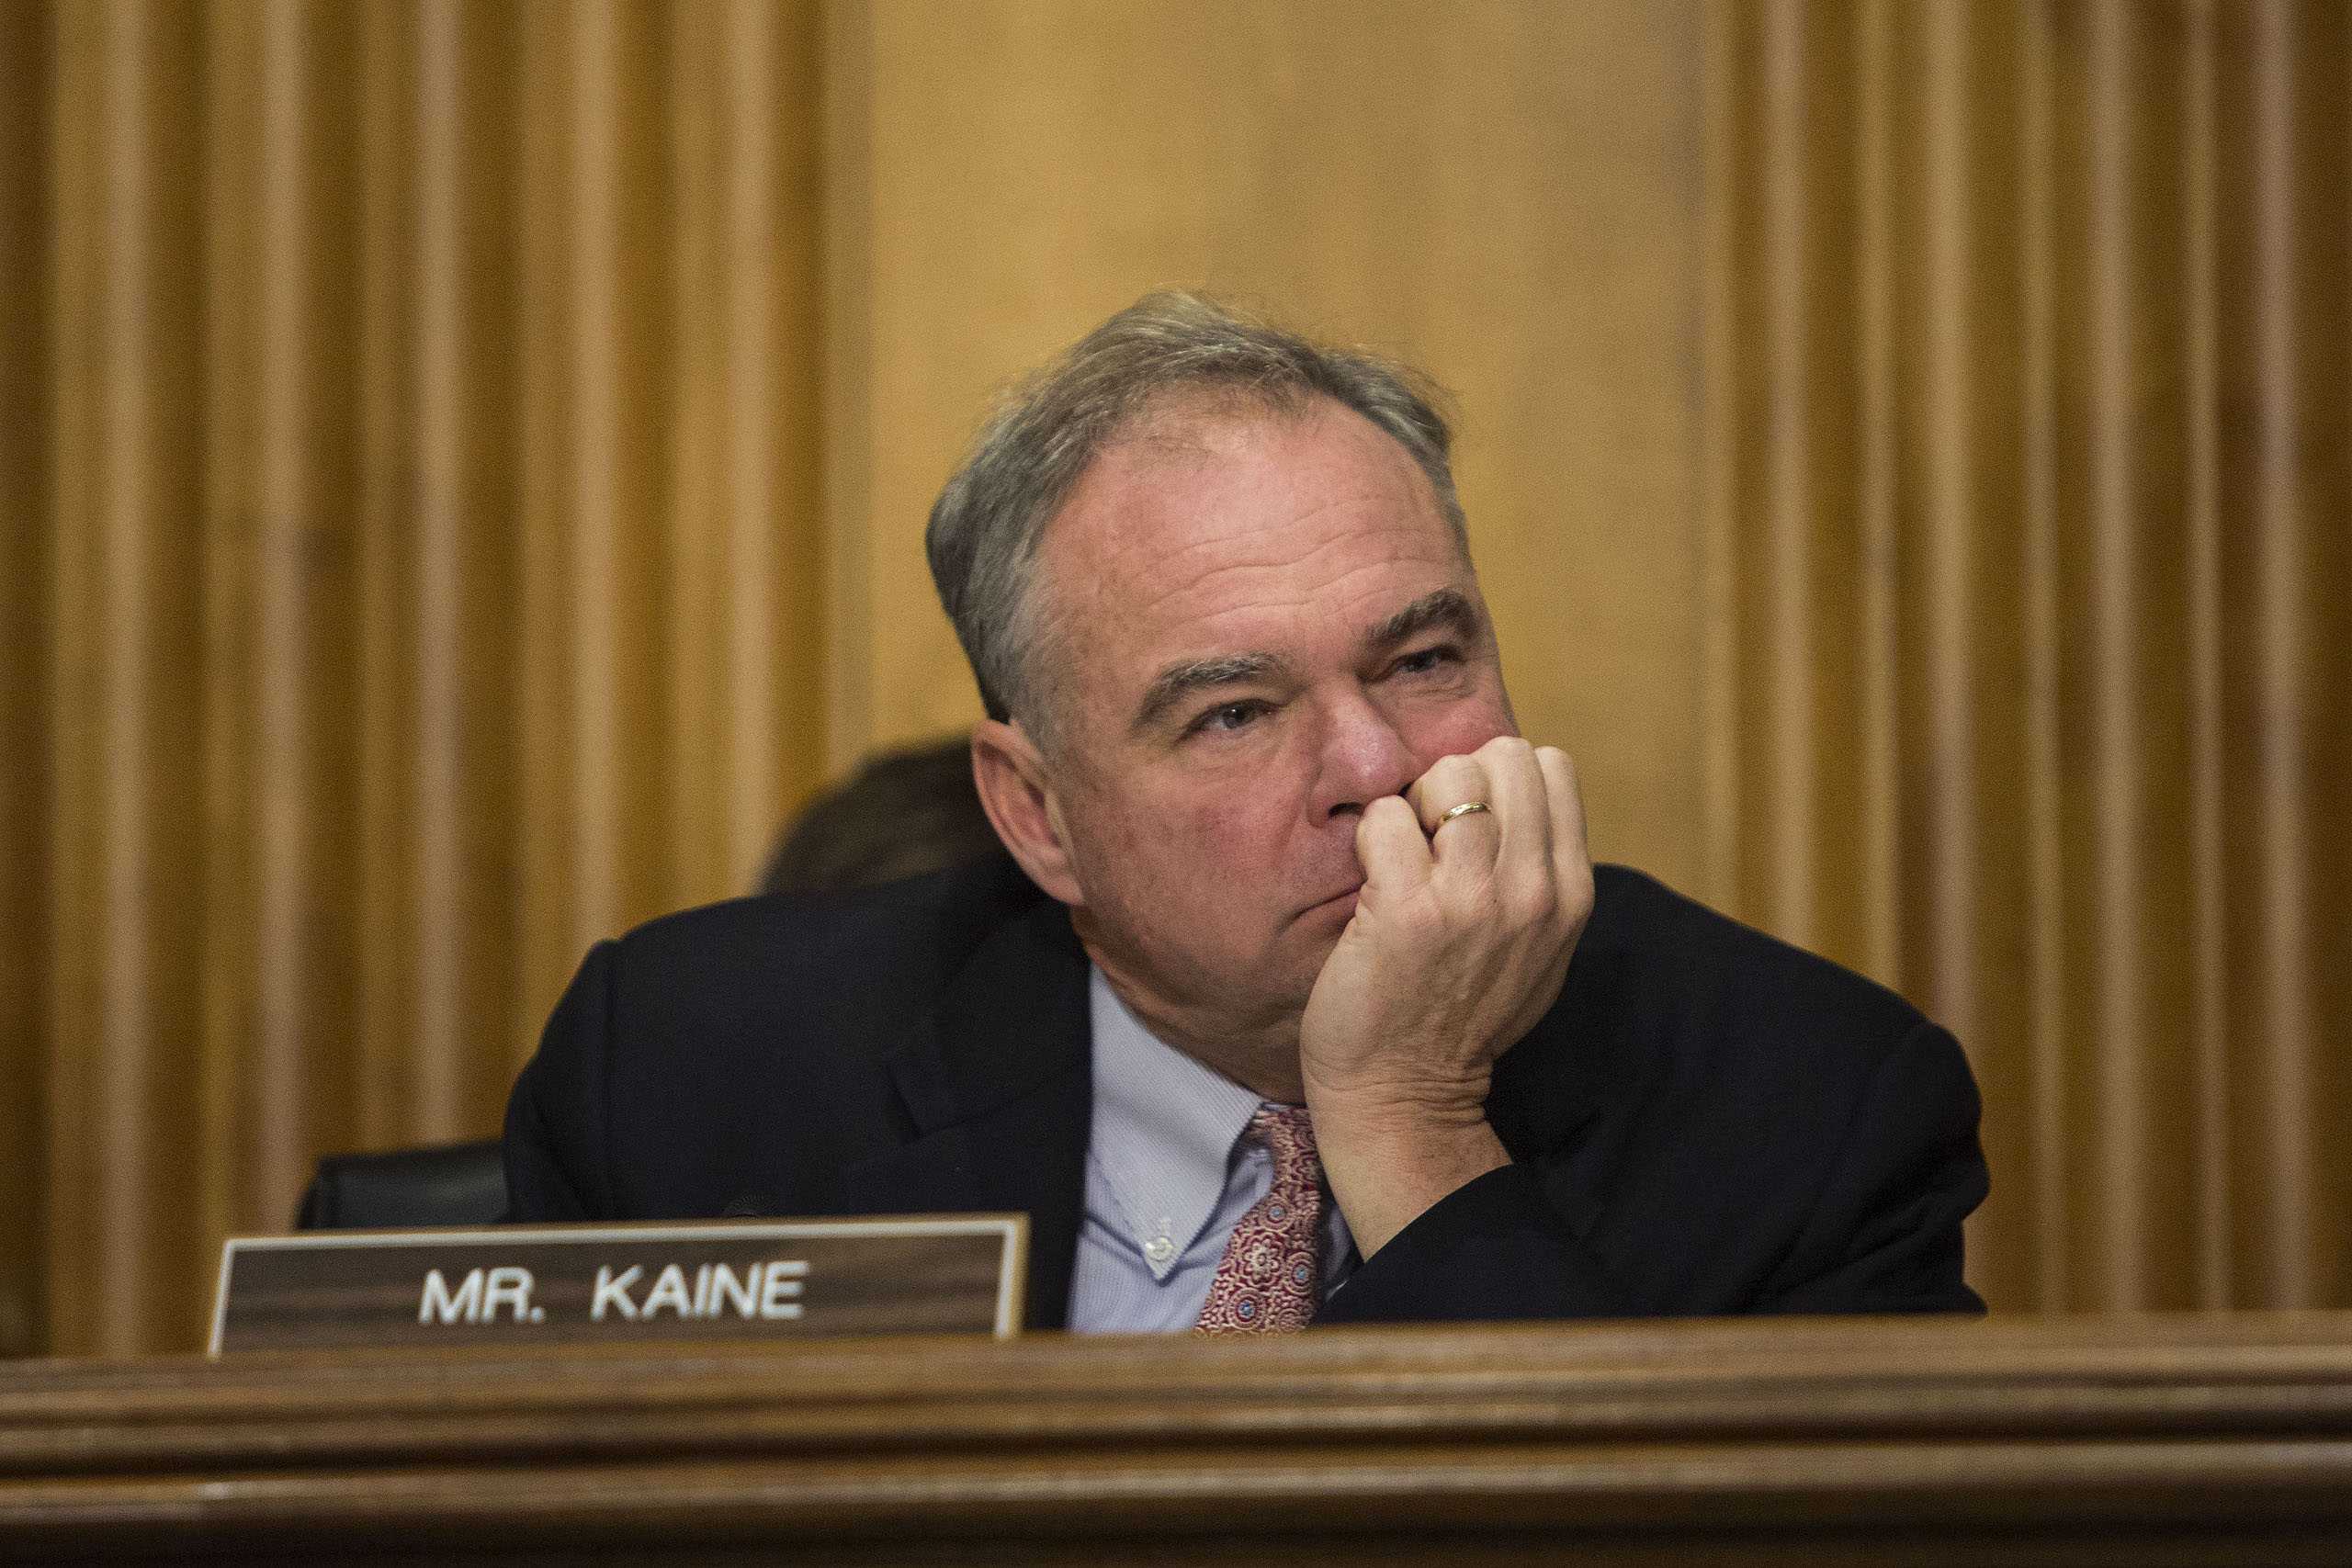 Sen. Tim Kaine, listens during a Senate Foreign Relations Committee hearing on the persistent North Korea denuclearization and human rights challenge, in the Dirksen Senate Office Building on Capitol Hill, in Washington on Oct. 20, 2015.